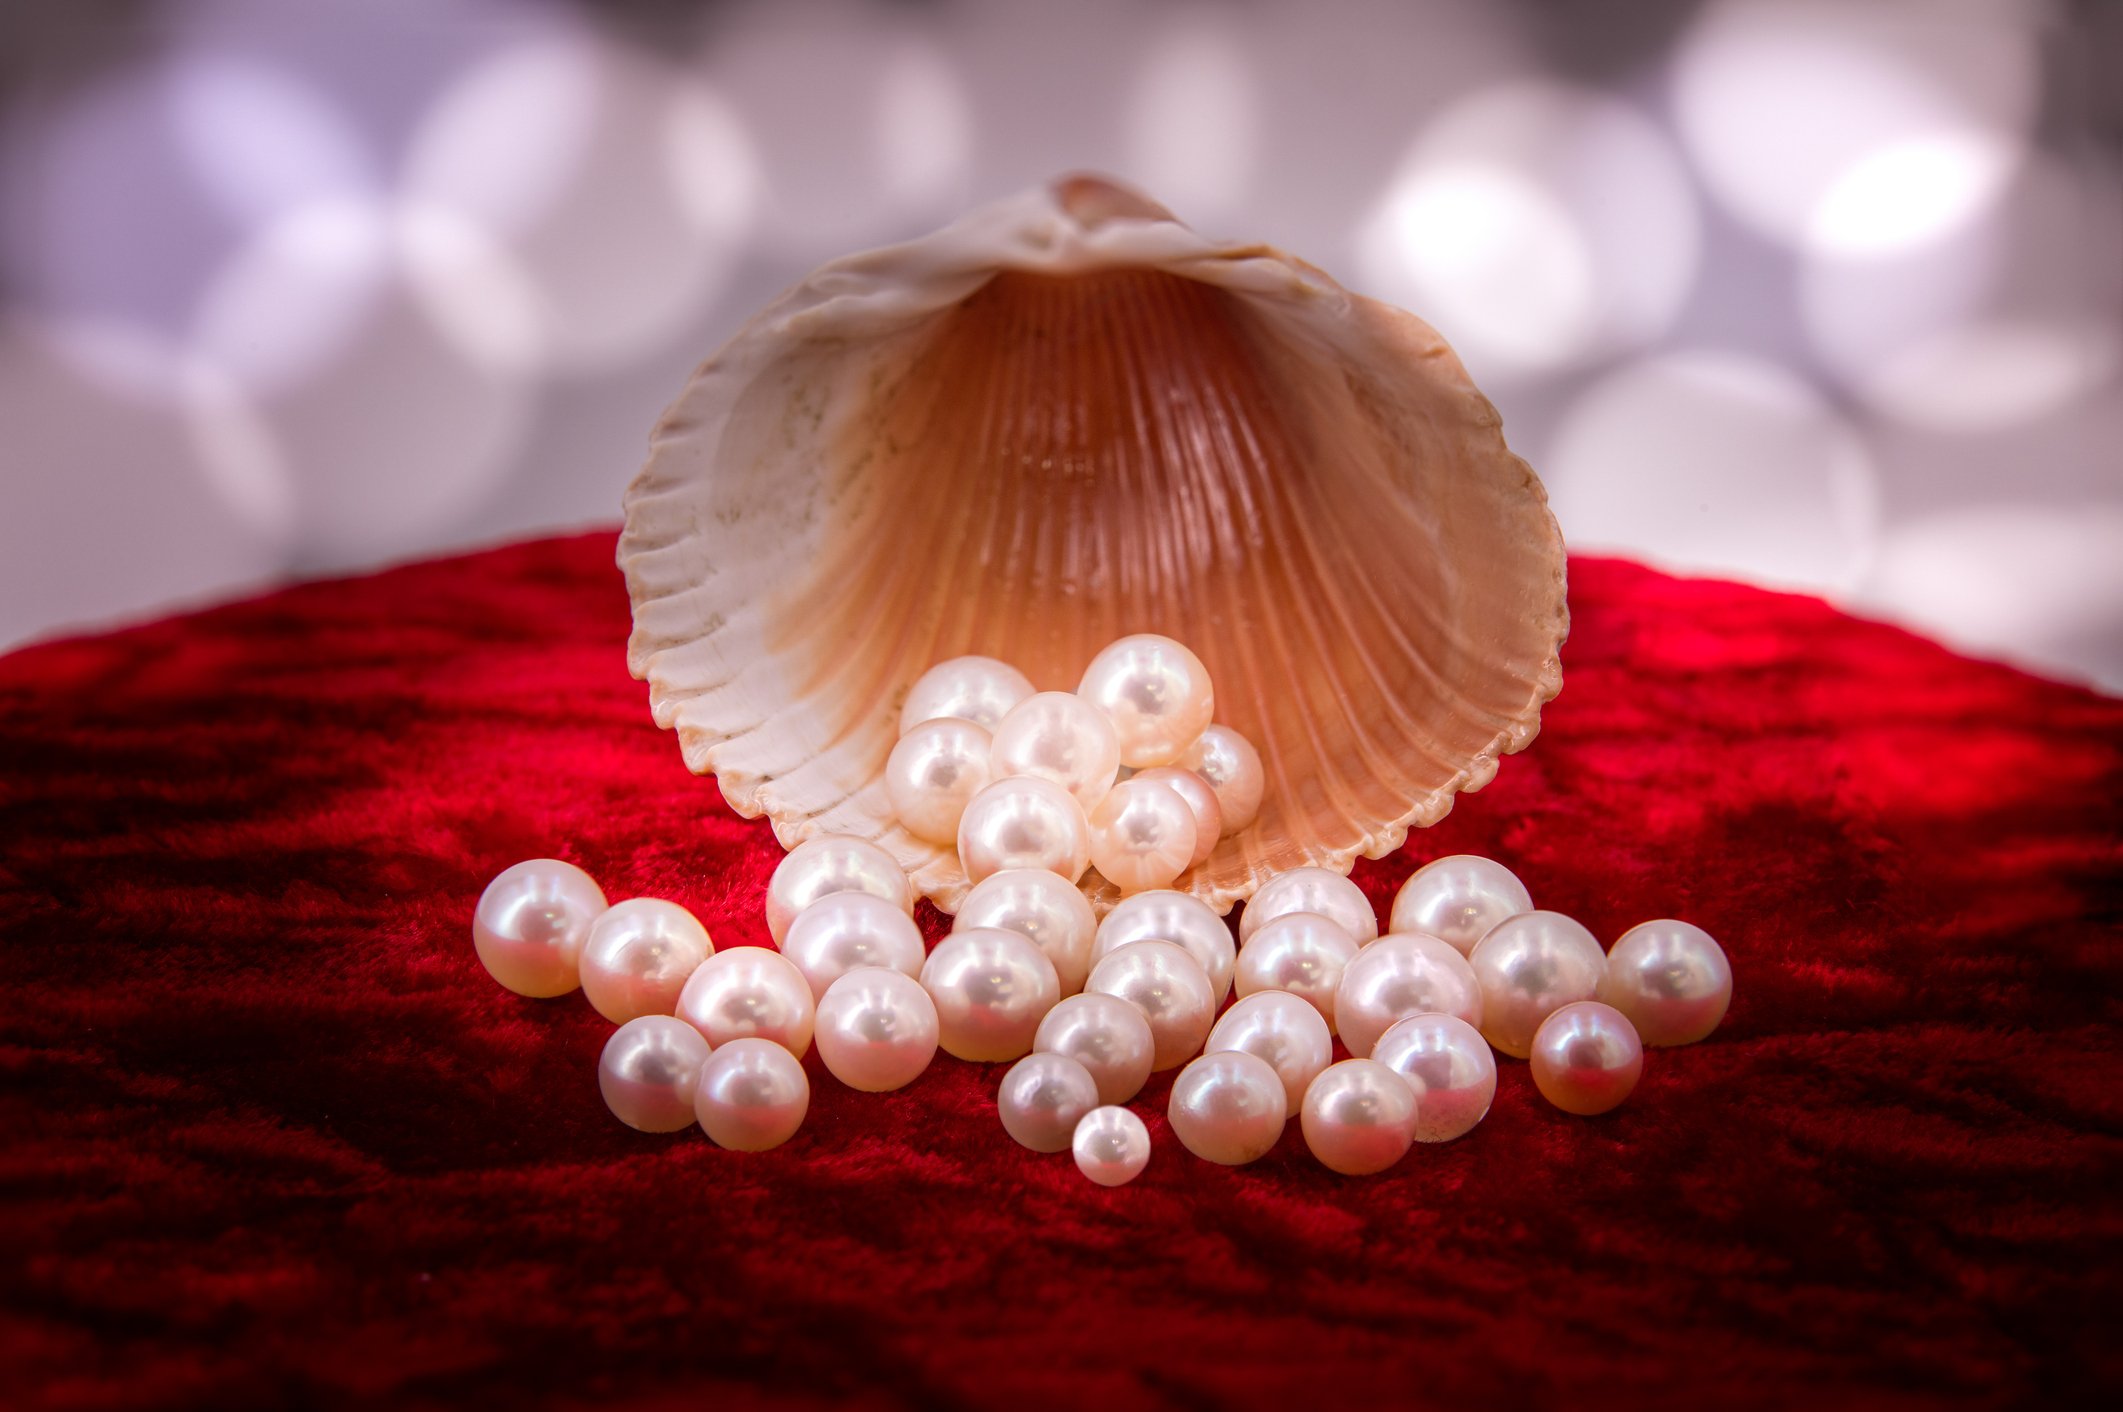 Graphic image of pearls pouring out of a shell The shell and pearls appear to rest on some red velvet texture 